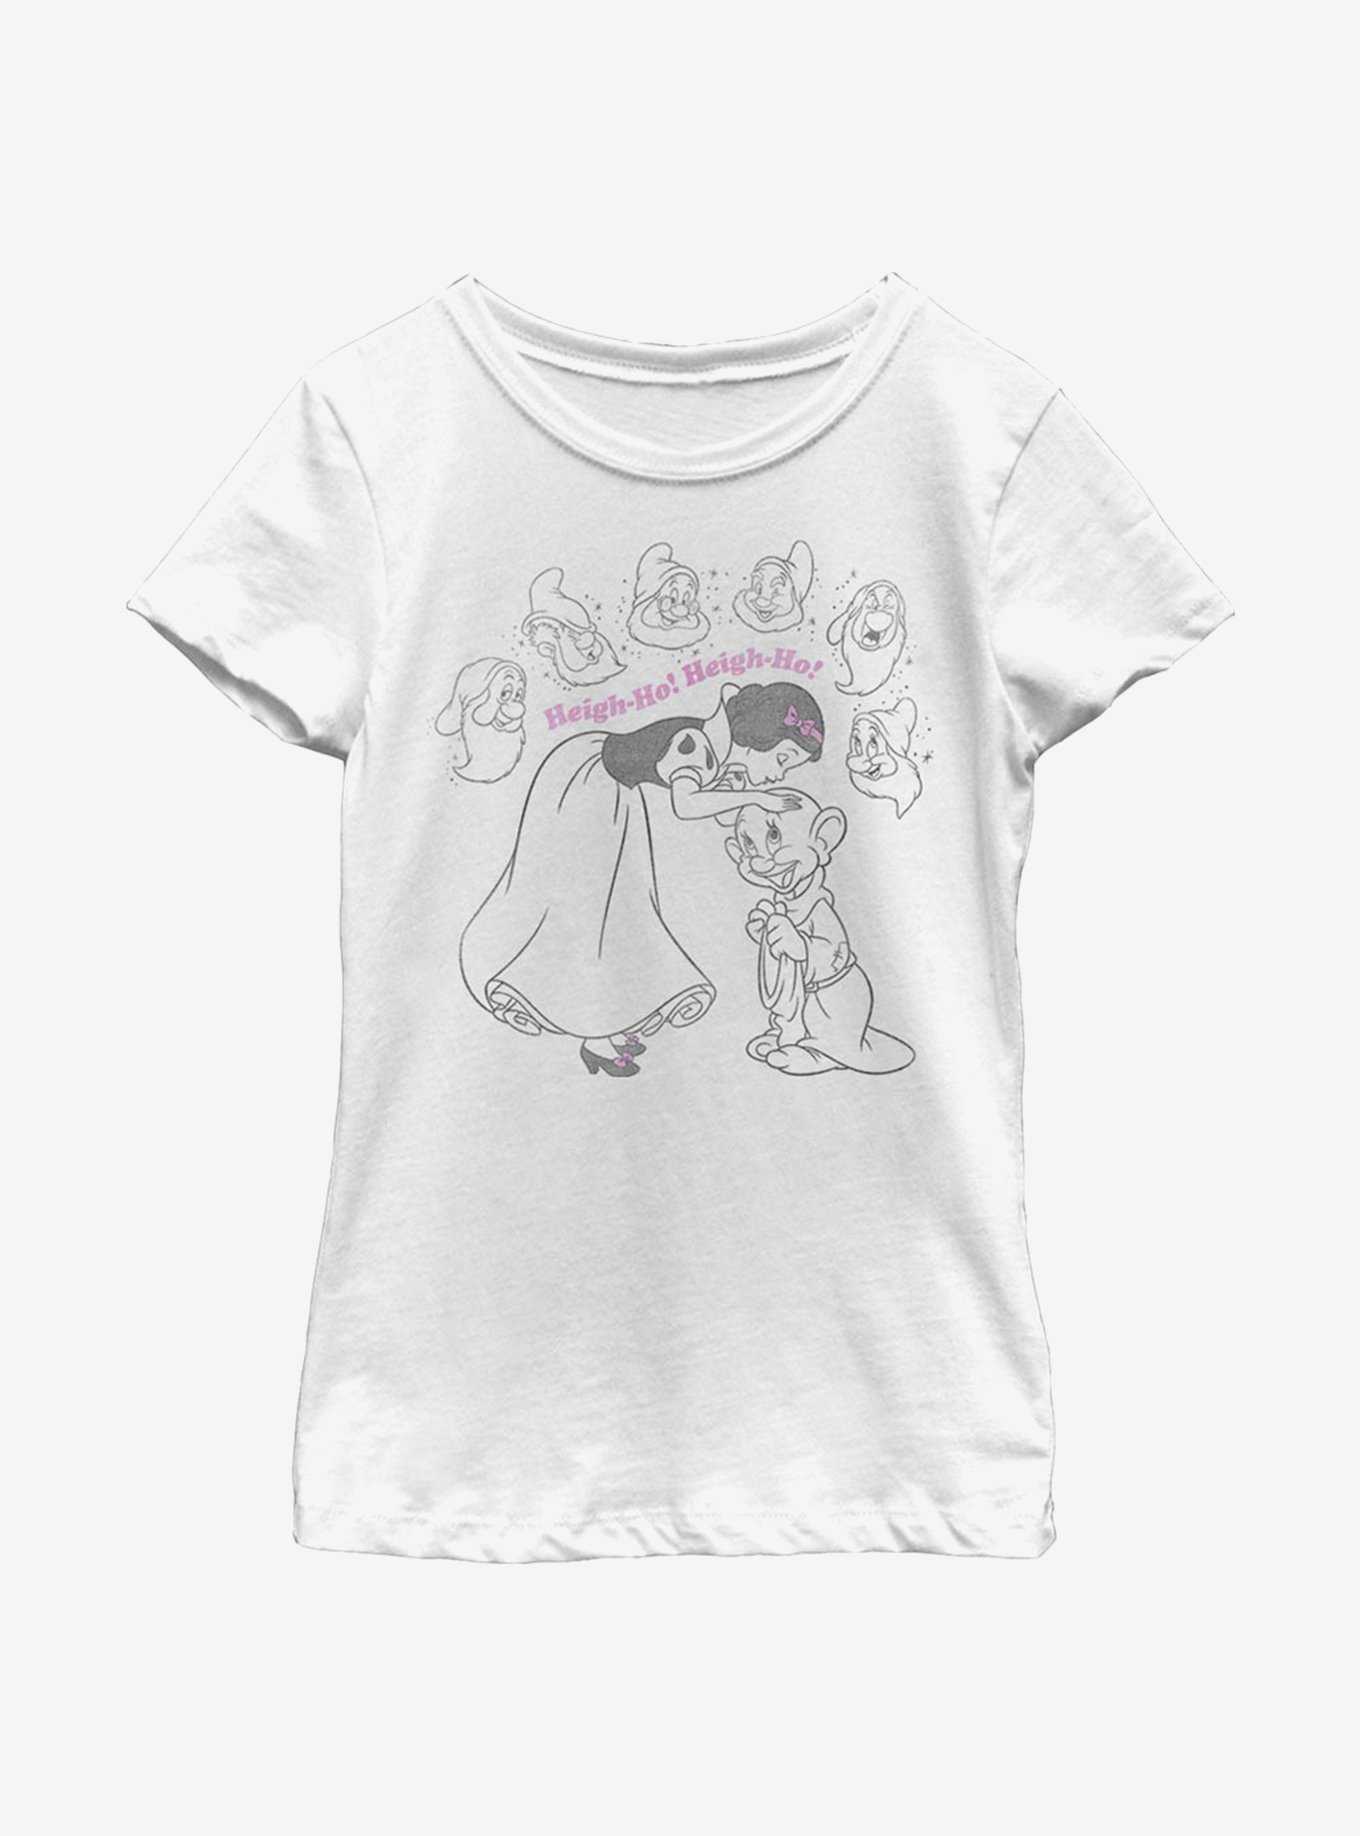 Disney Snow White And The Seven Dwarfs Heigh-Ho Youth Girls T-Shirt, , hi-res